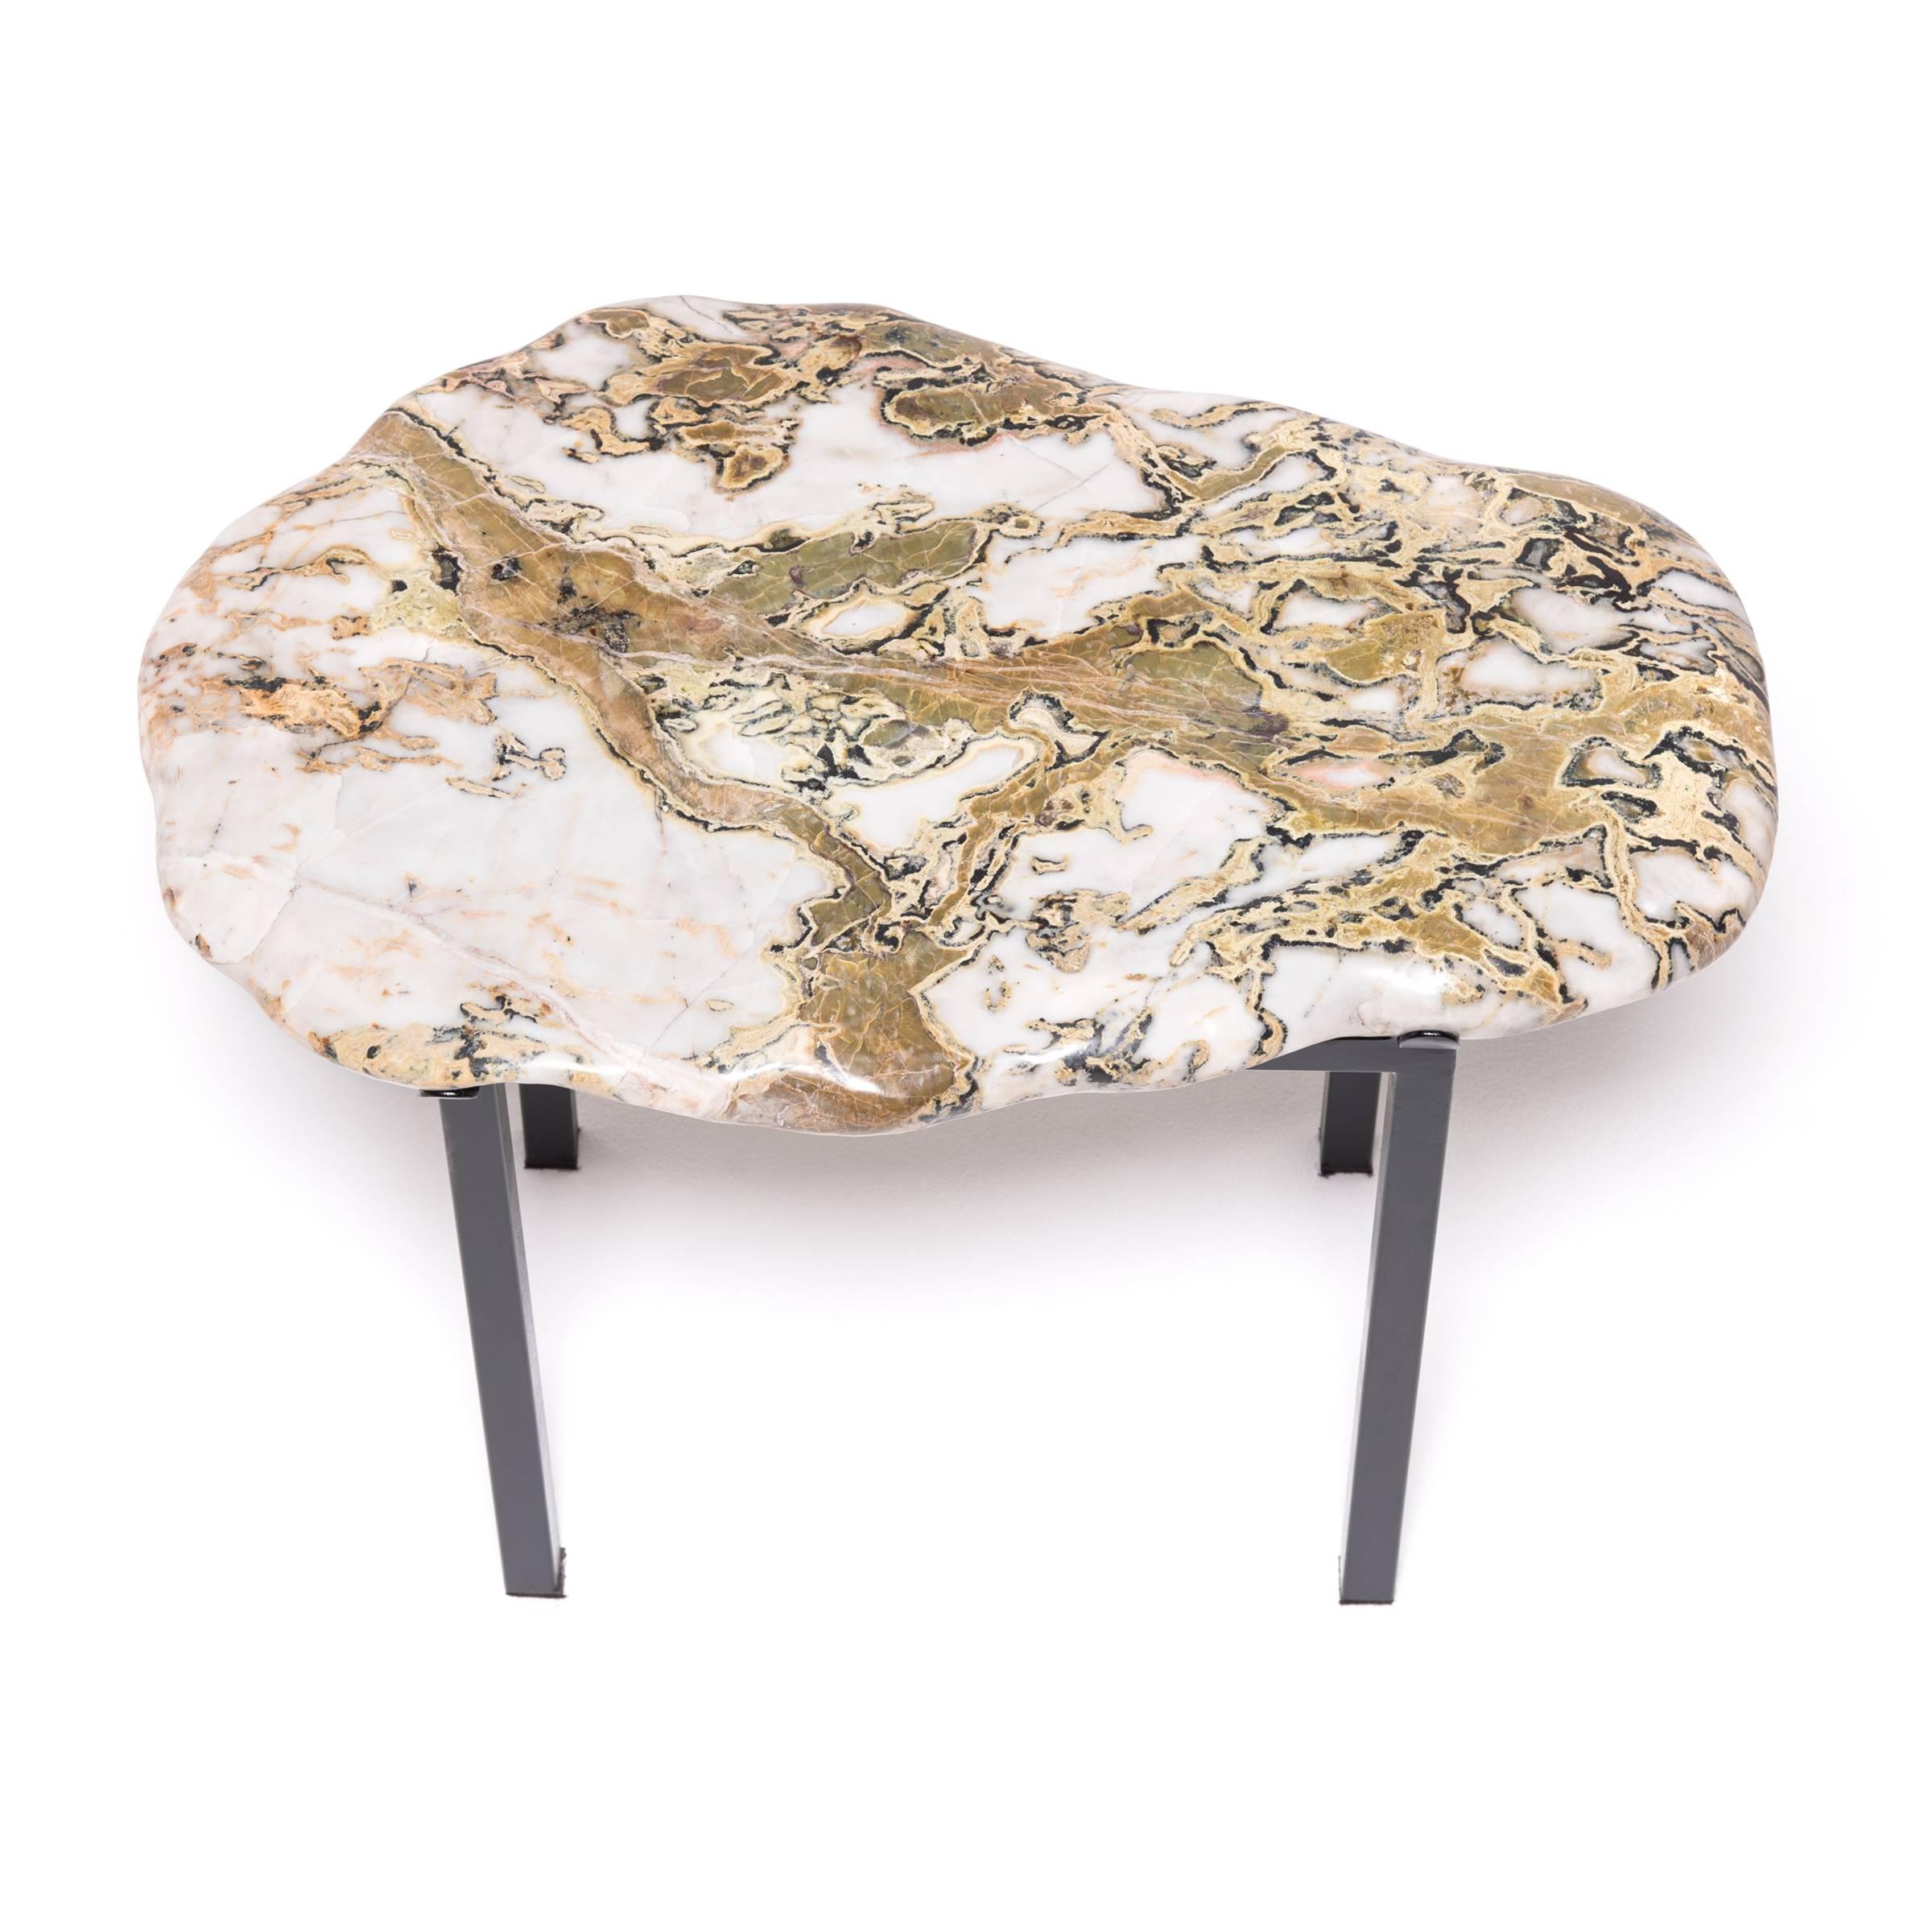 Steel Chinese Meditation Stone Table